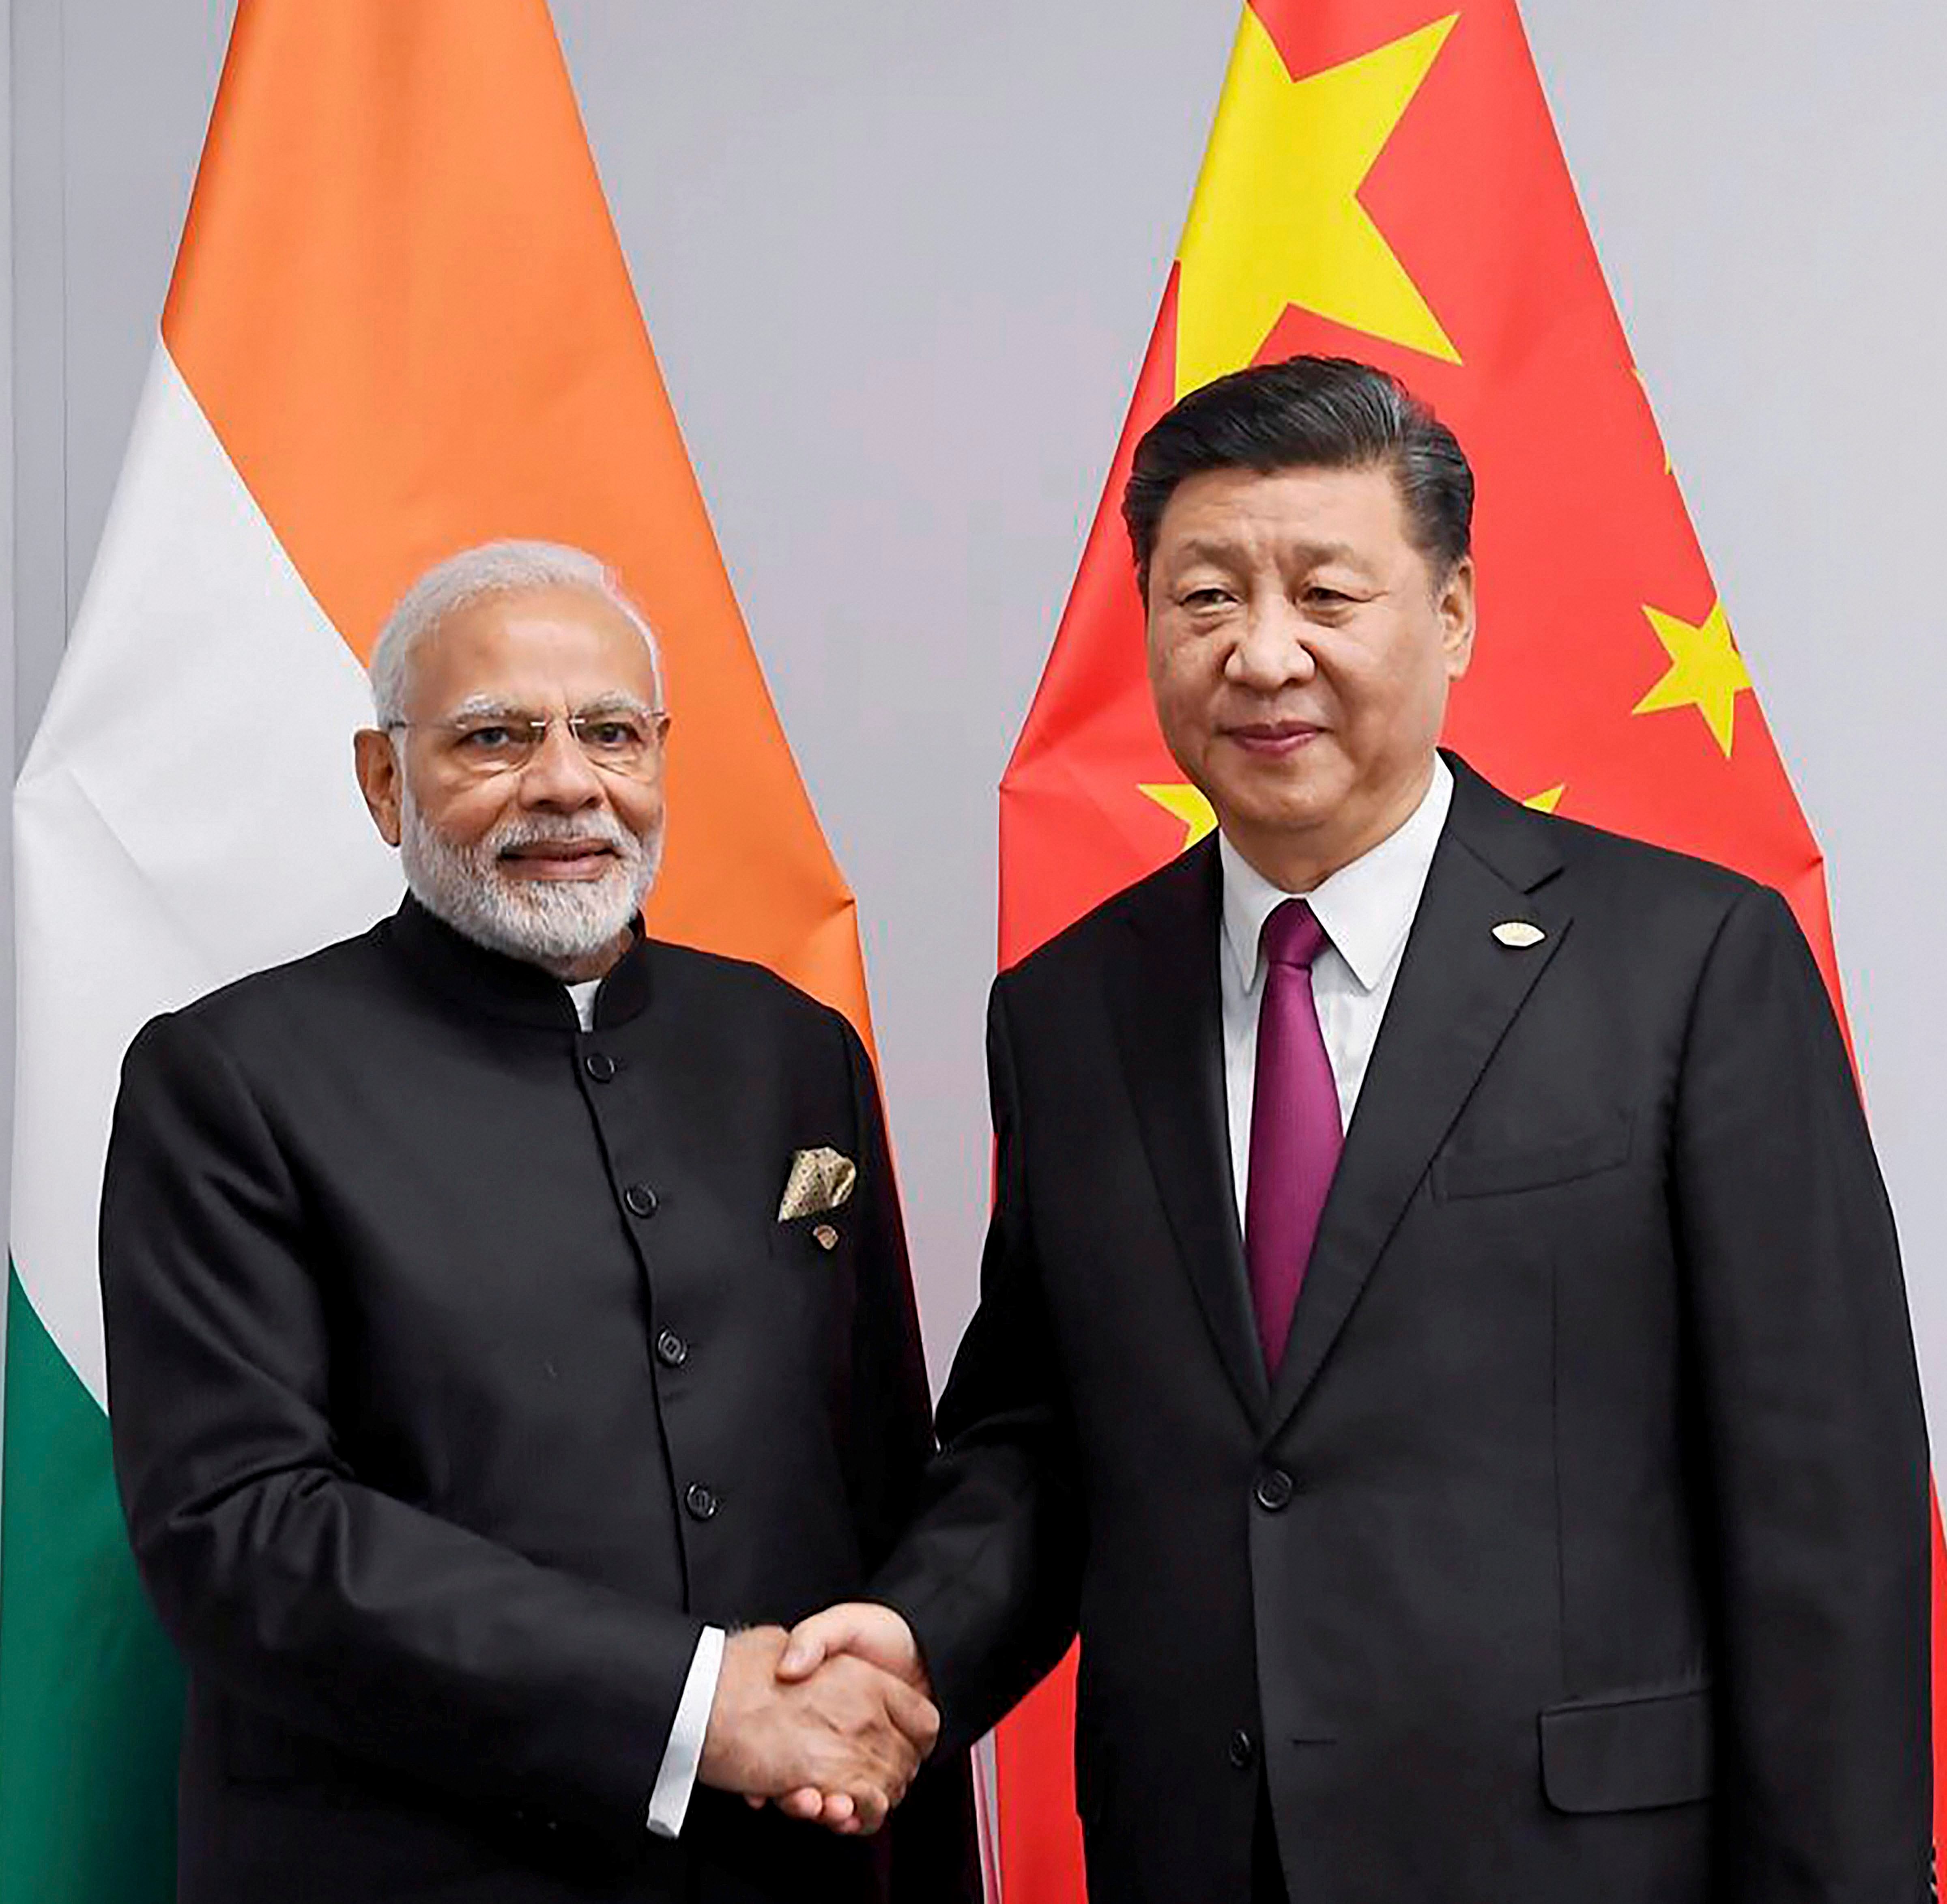 Prime Minister Narendra Modi shakes hands with Chinese President Xi JinpingPrime Minister Narendra Modi shakes hands with Chinese President Xi Jinping. (PTI Photo)